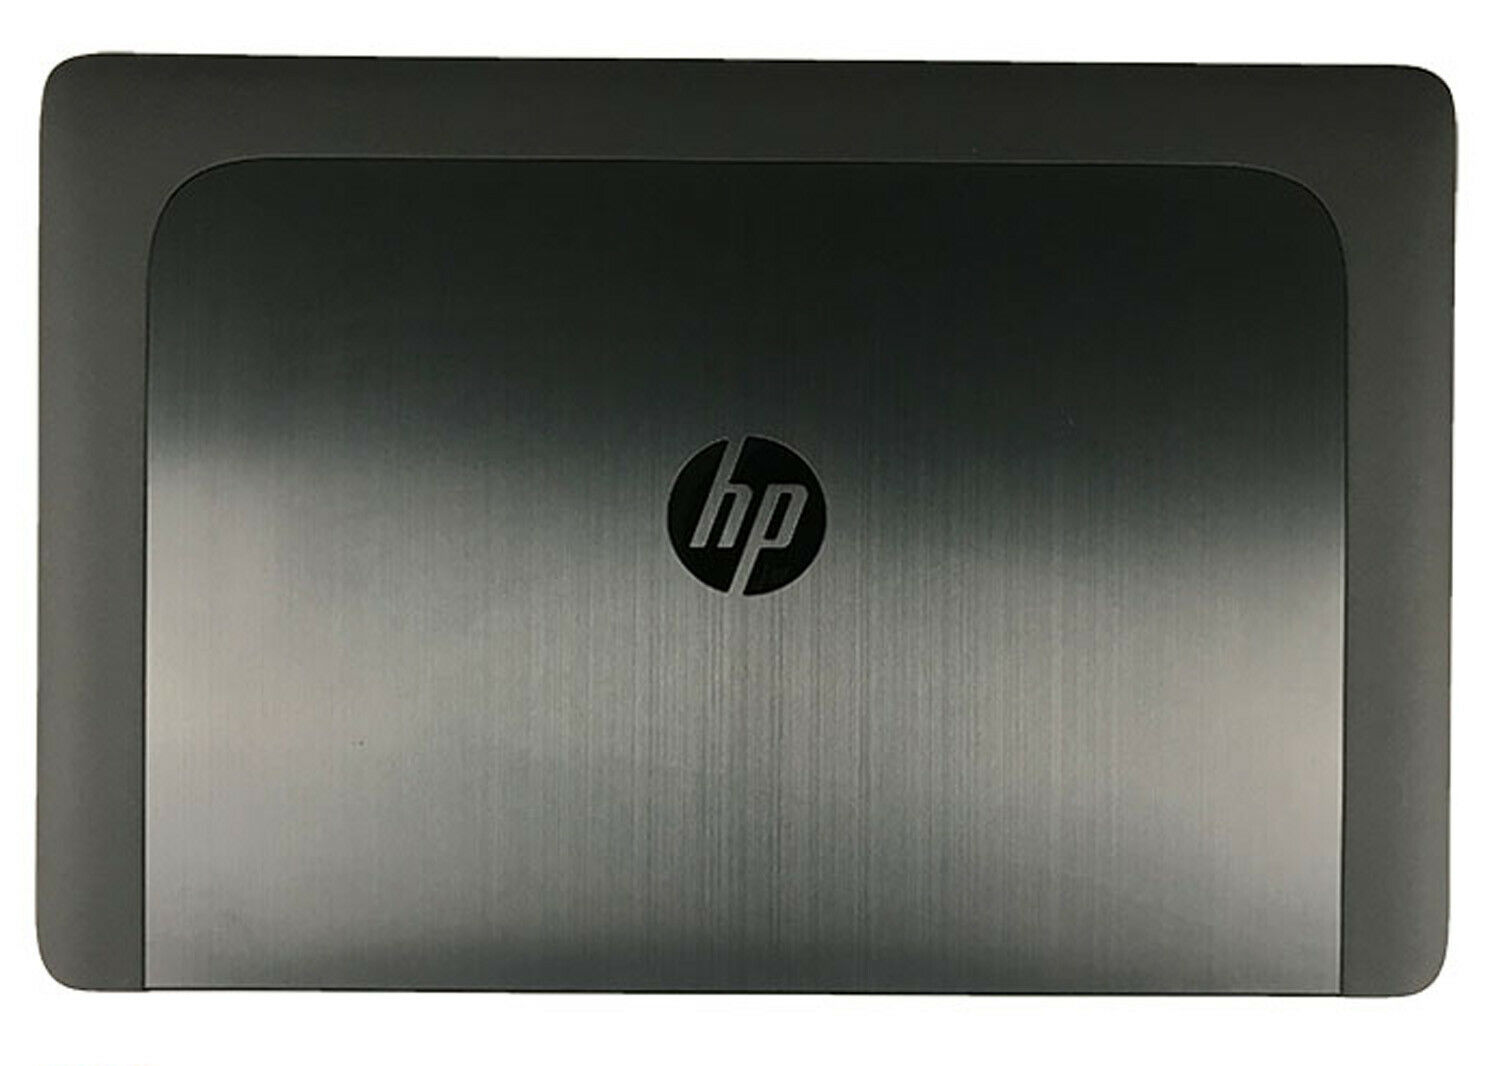 796896-001 6070B0826001 FOR HP ZBOOK 15U LCD BACK COVER REAR LID 15.6 BLK